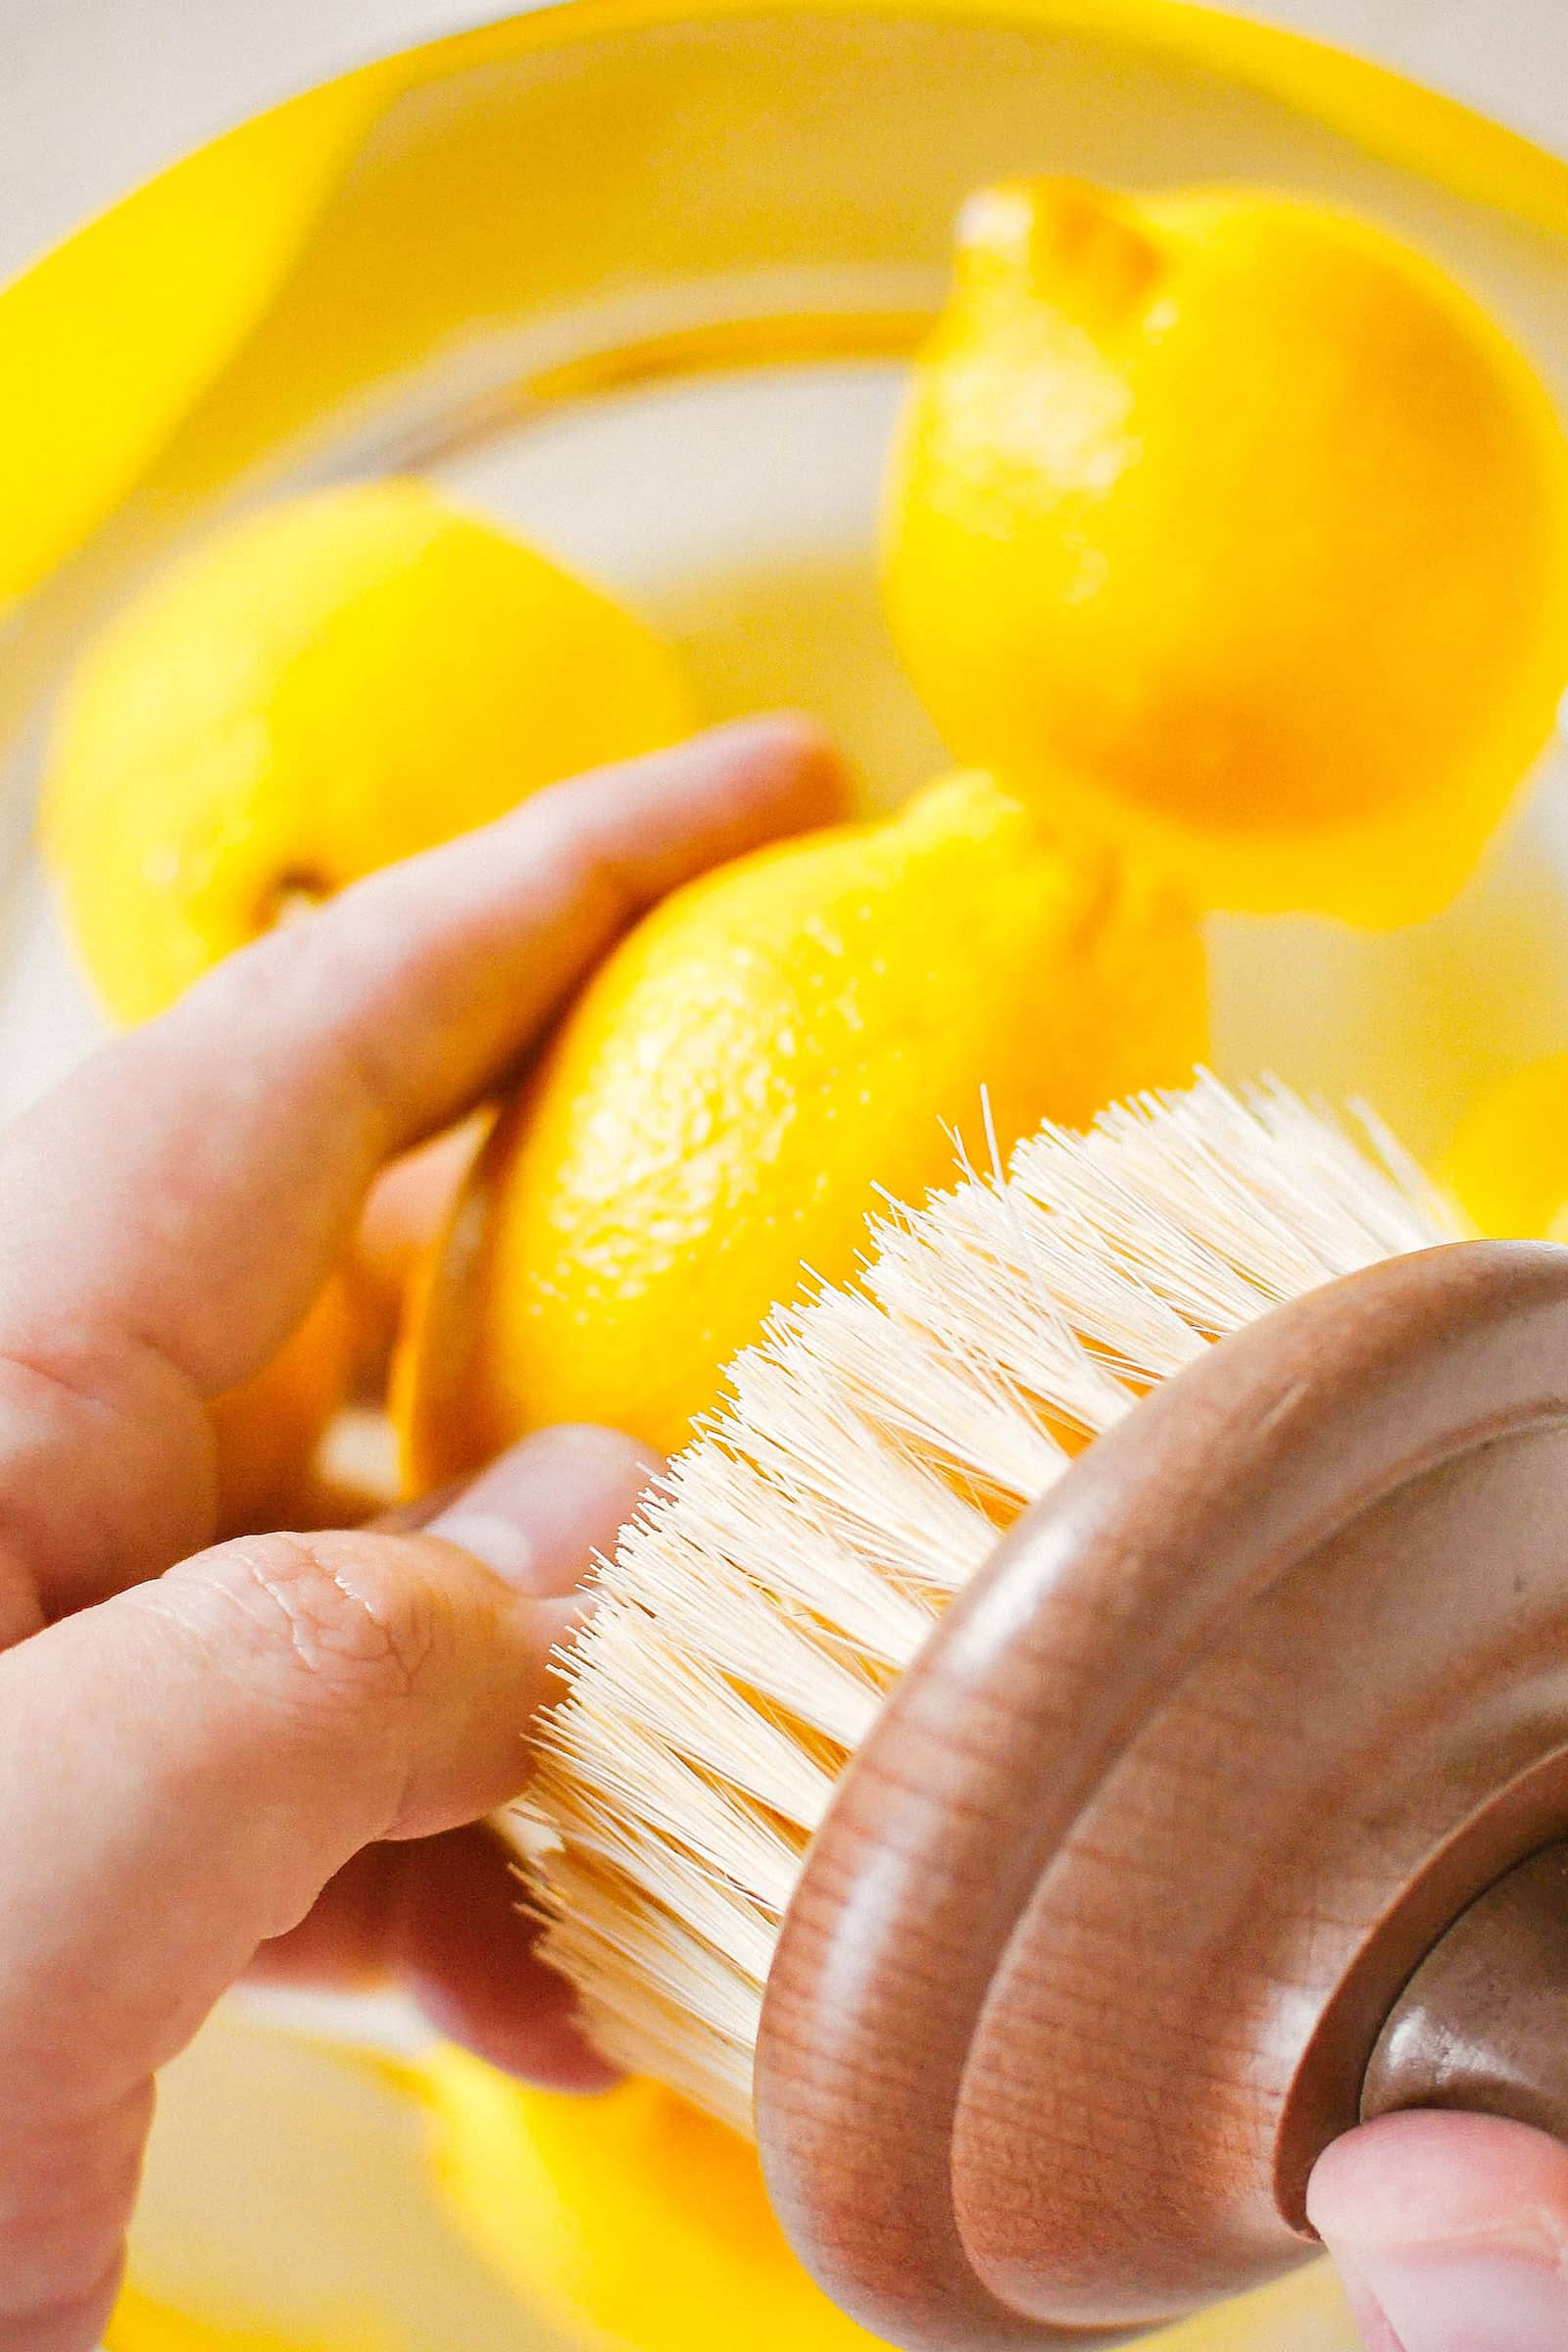 Hand scrubbing a lemon with a wooden natural bristle brush